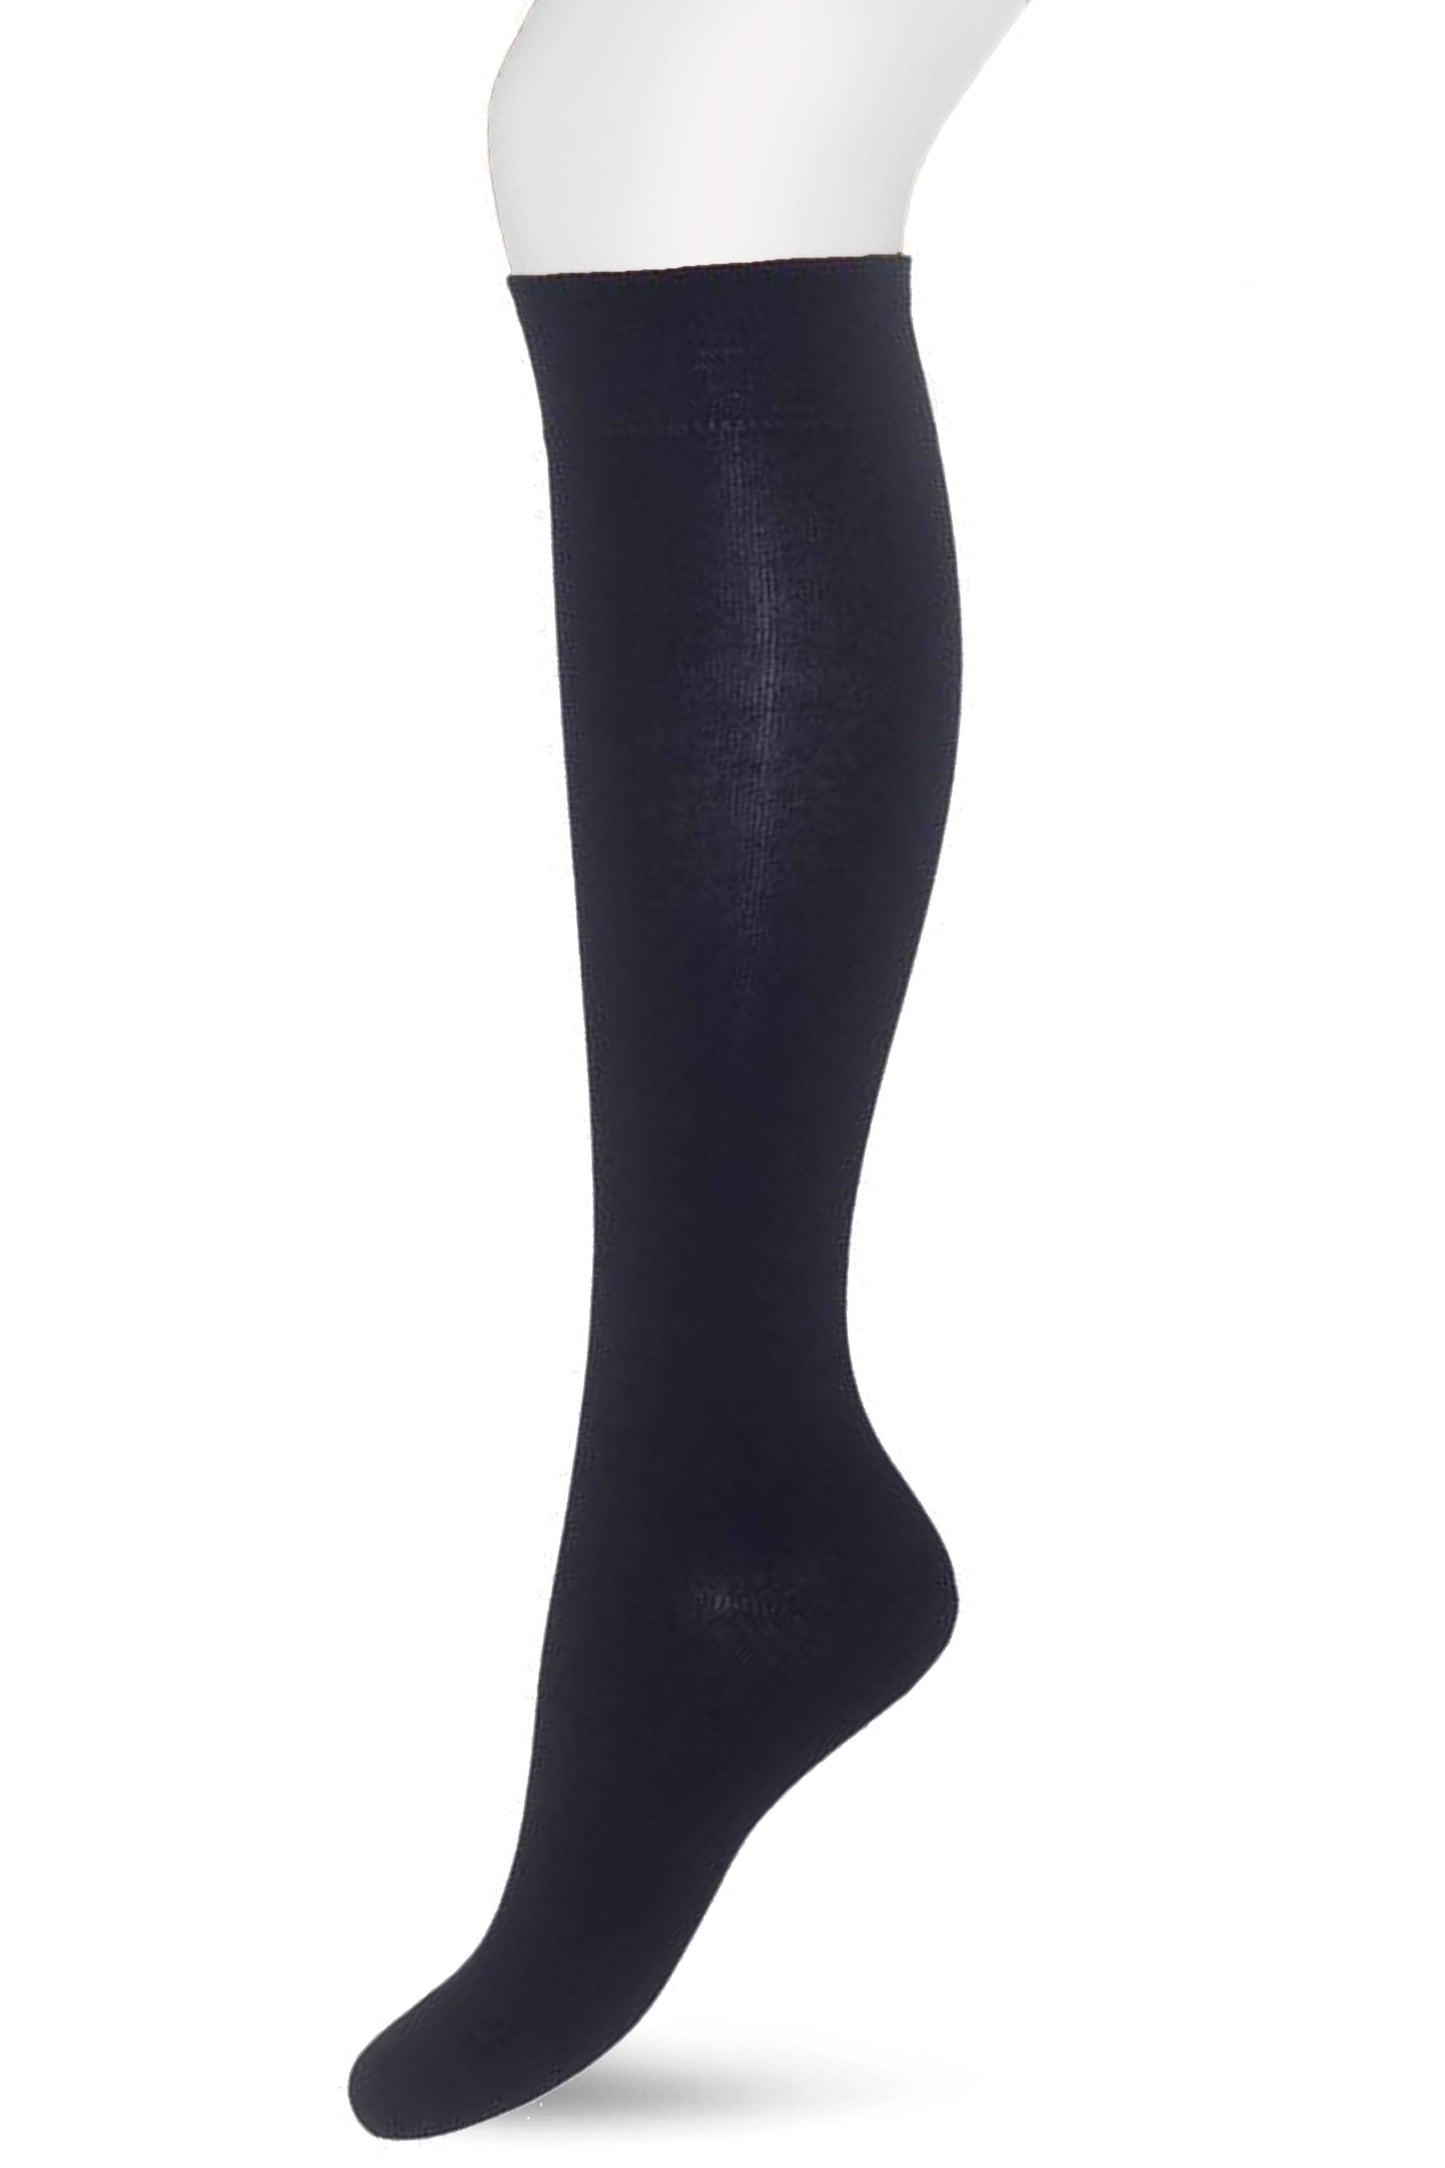 Bonnie Doon Wool/Cotton Knee-High R715011 - navy thermal knee socks perfect for cold Winters